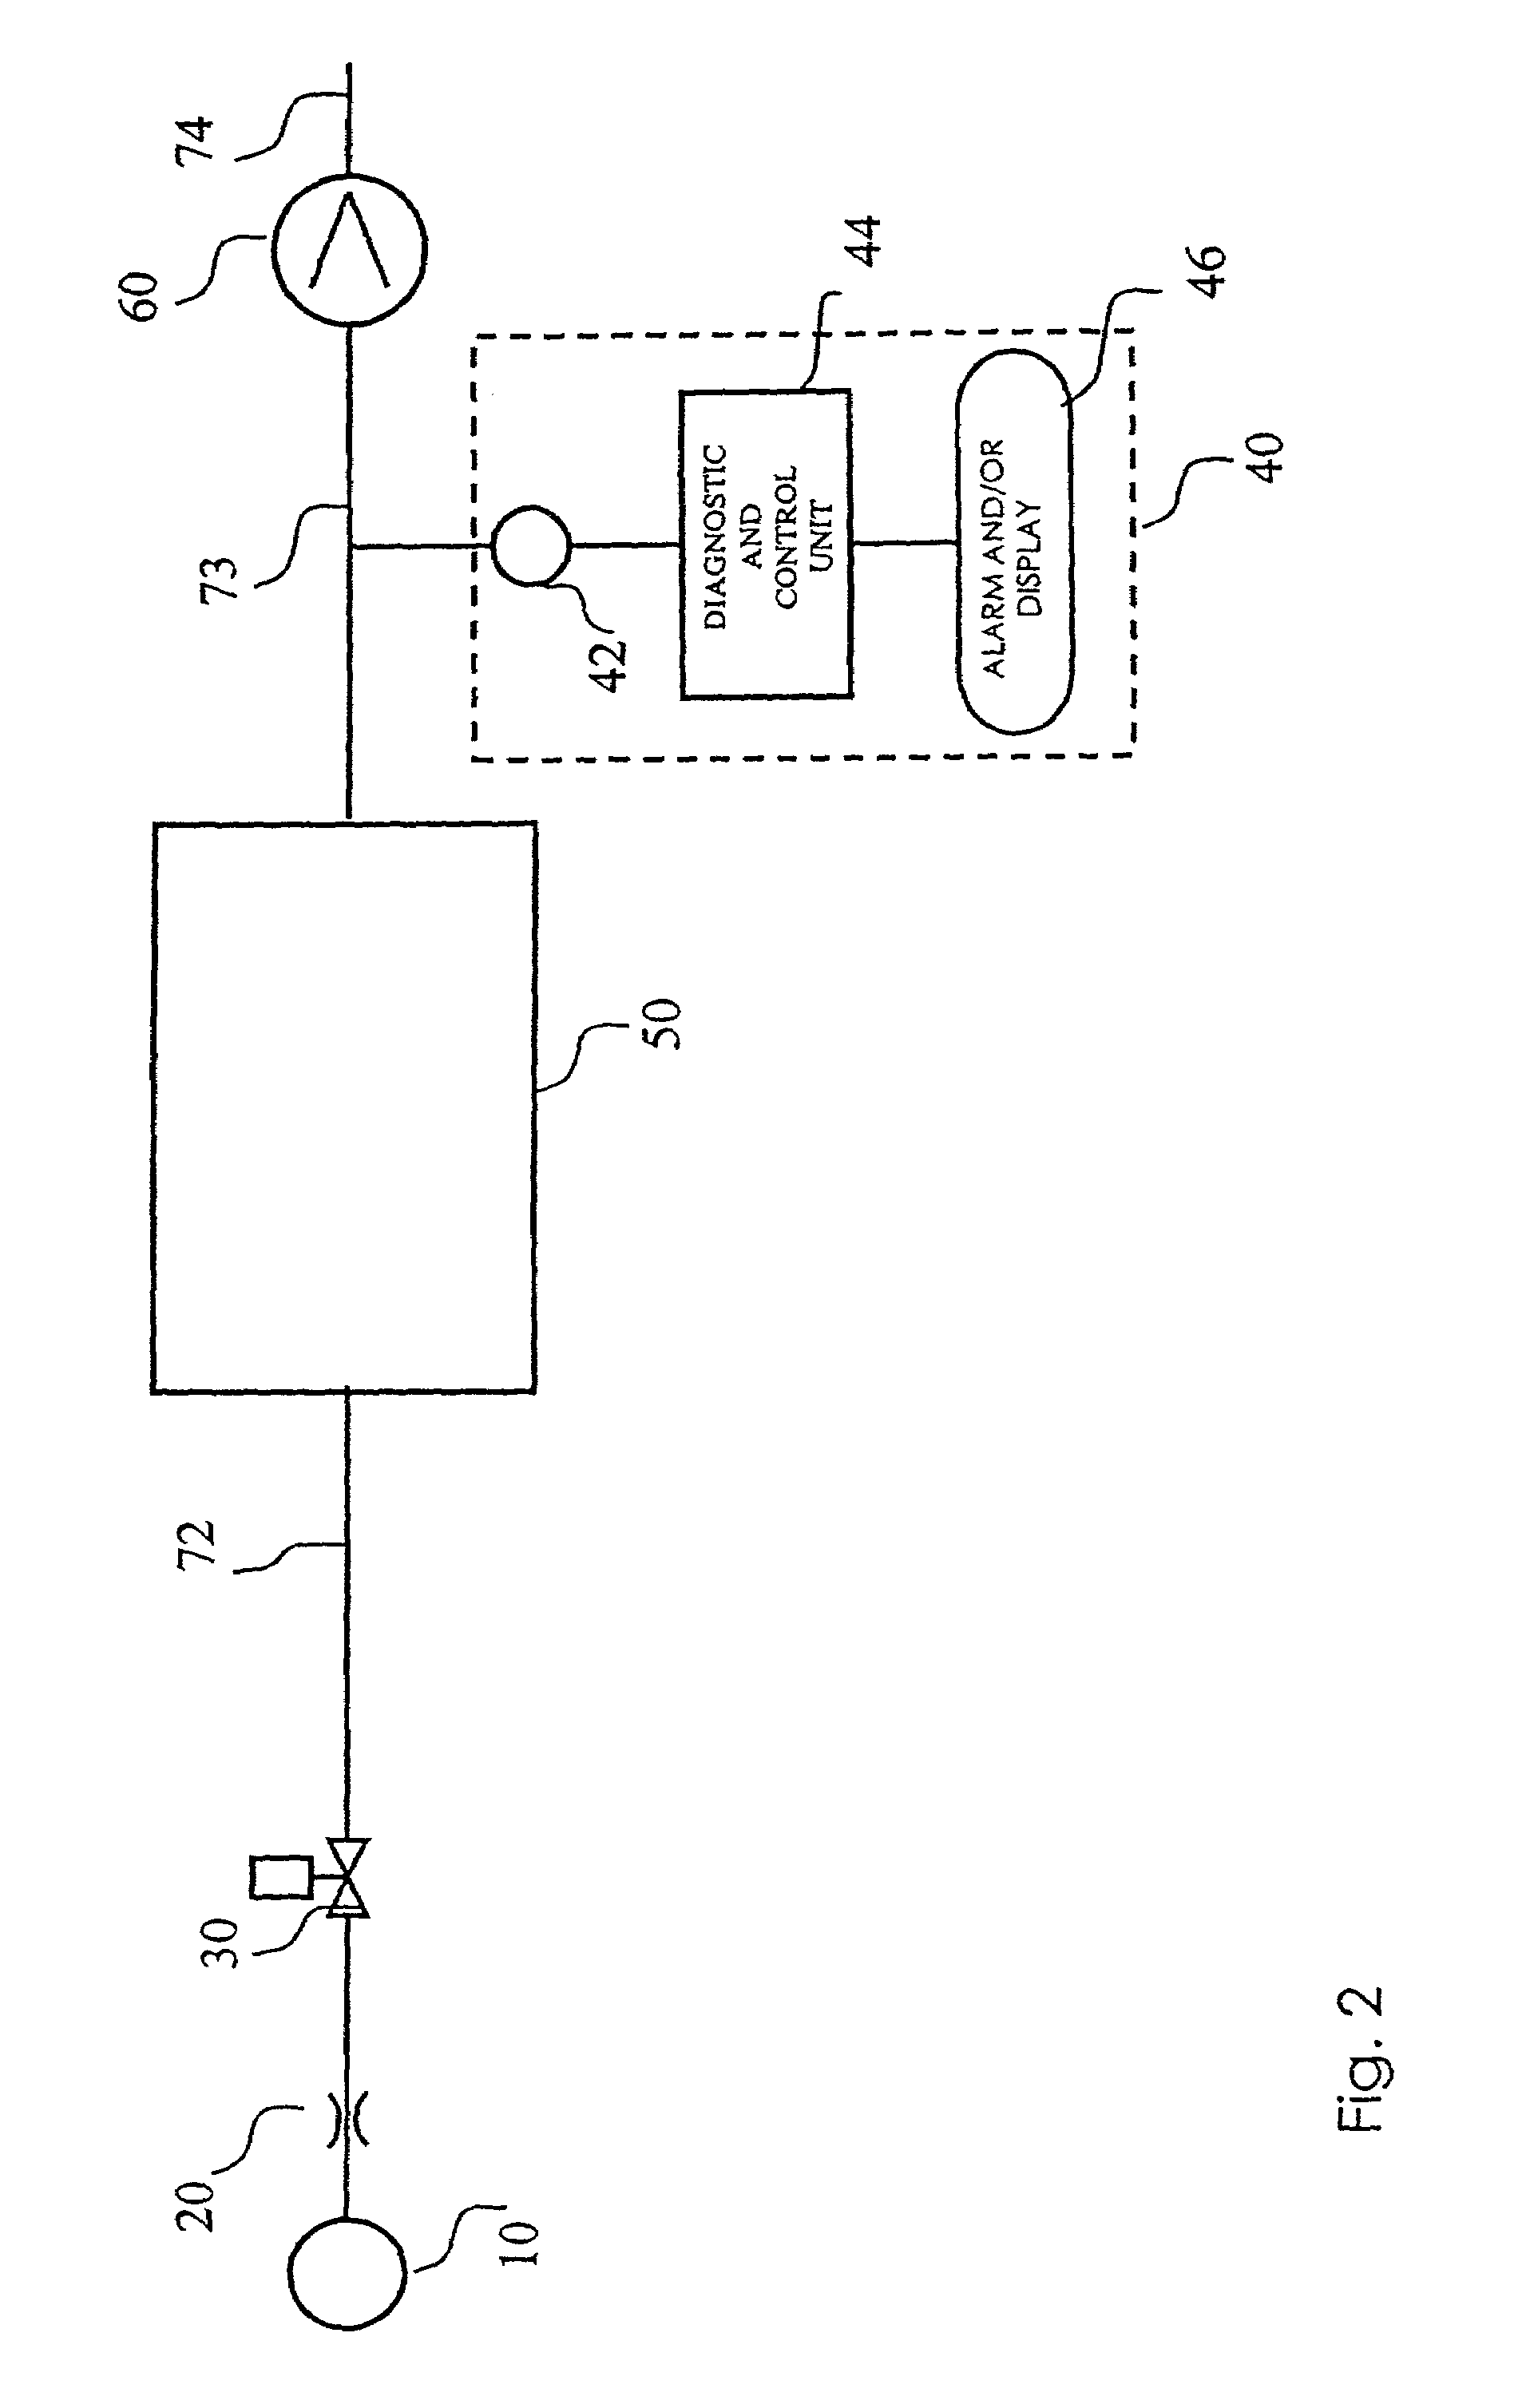 Active pulse monitoring in a chemical reactor